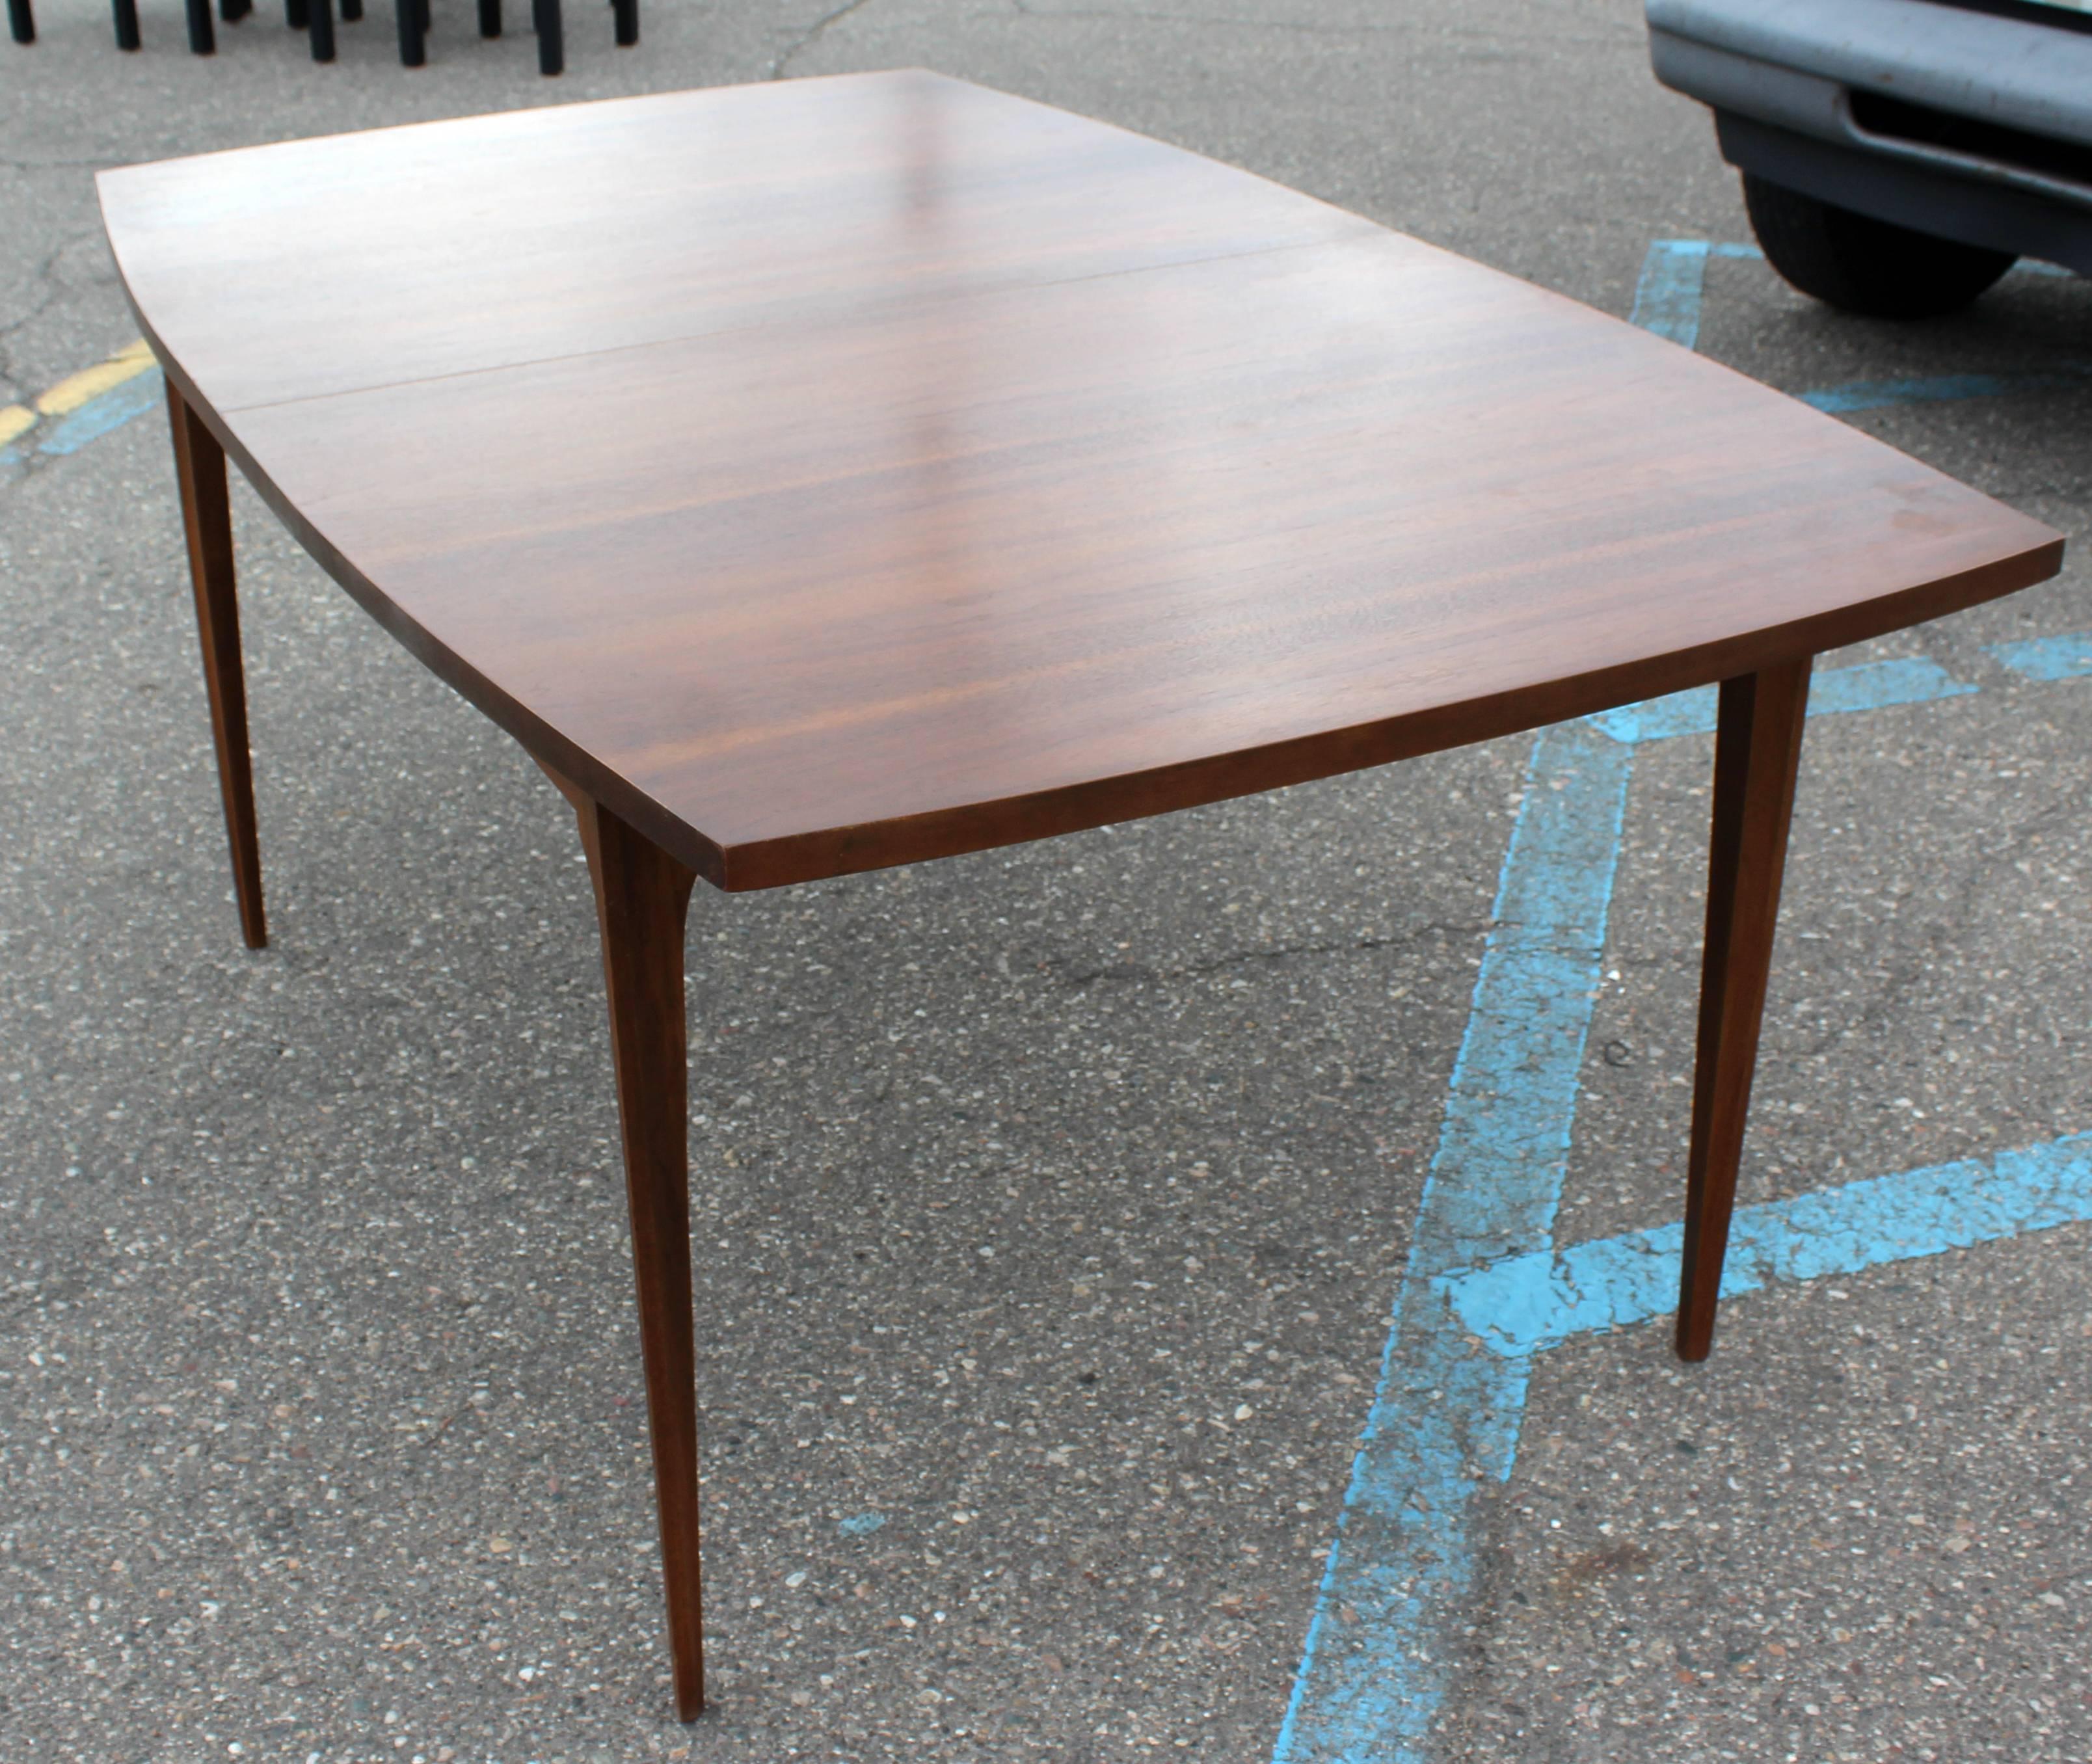 For your consideration is a wonderful dining table, by Oscar Niemeyer for Broyhill Brasilia, circa the 1960s. In excellent condition. The dimensions are 66